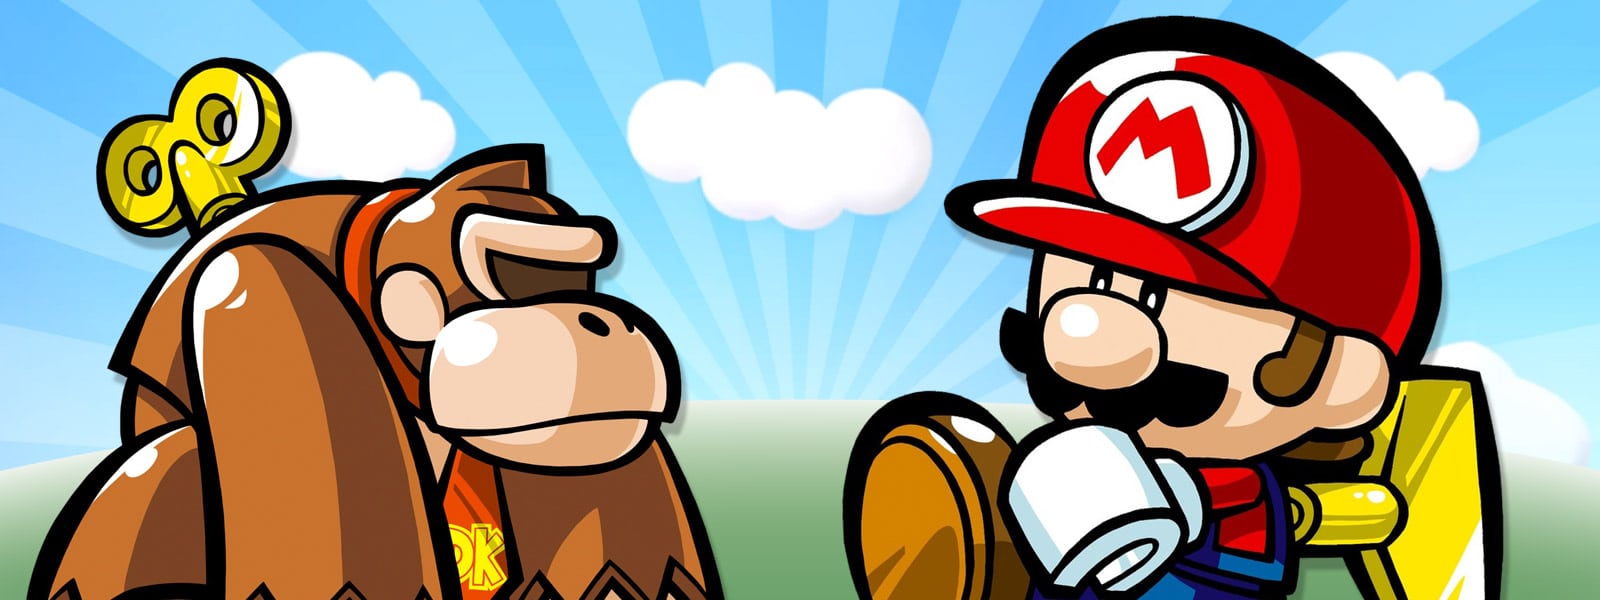 Mario and Donkey Kong: Minis On The Move Review